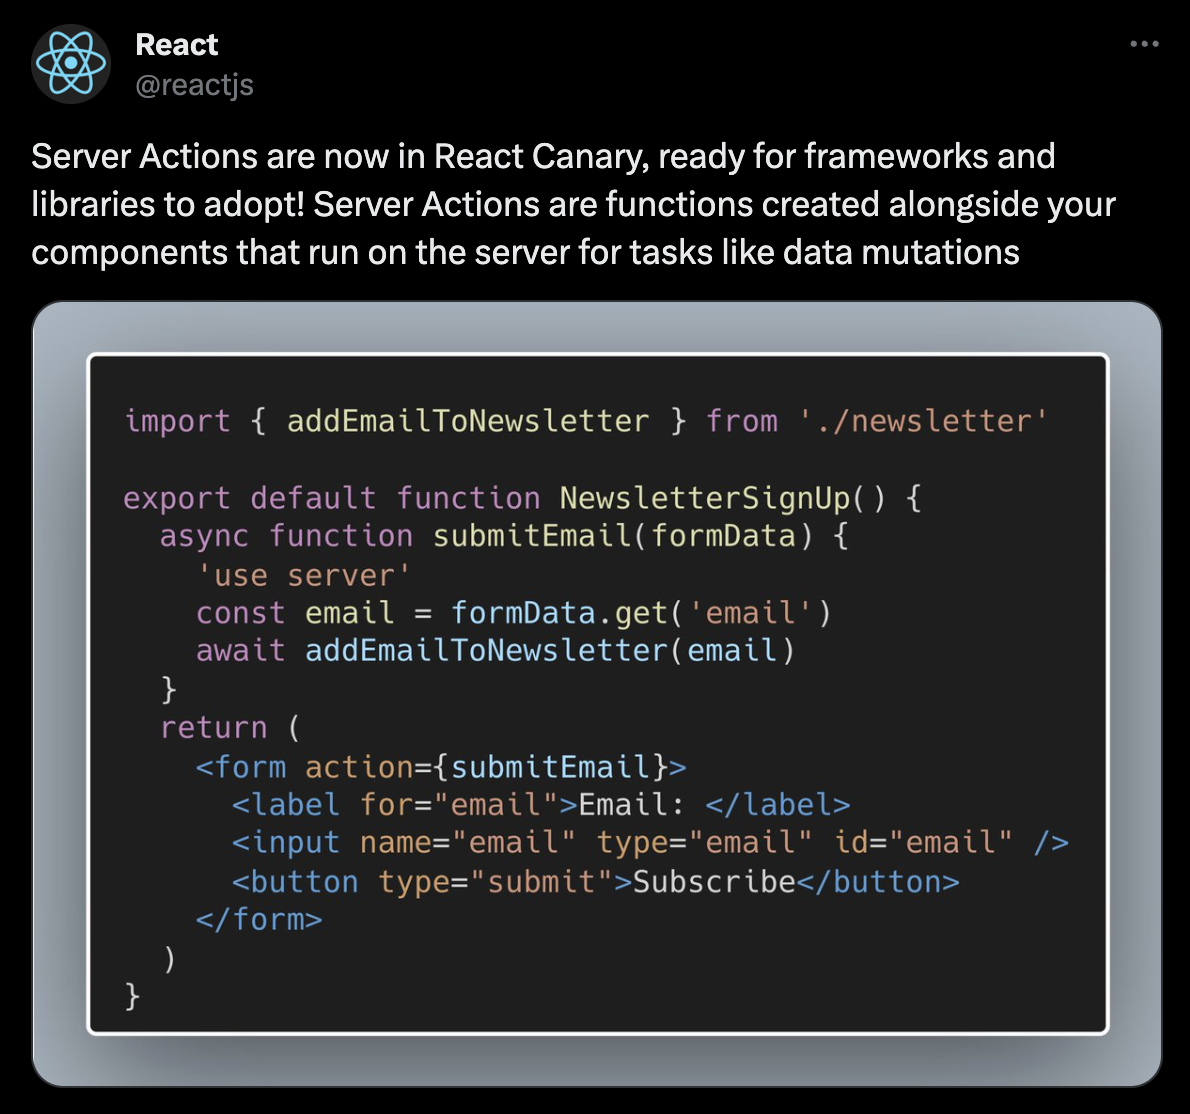 Server Actions are now in React Canary, ready for frameworks and libraries to adopt! Server Actions are functions created alongside your components that run on the server for tasks like data mutations